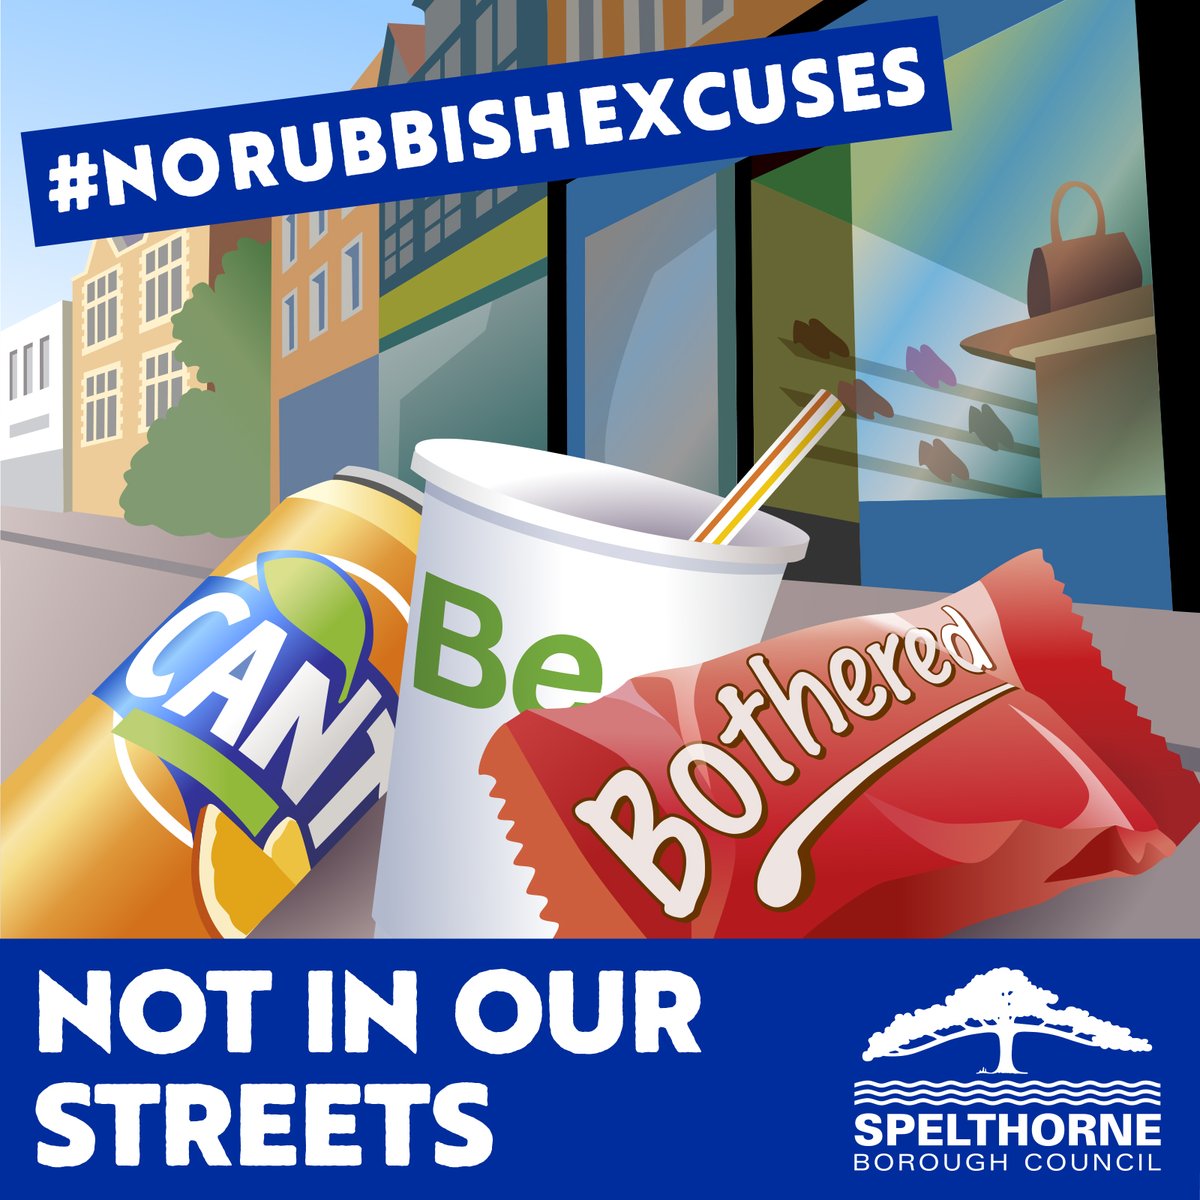 Our streets are where we live and we need to keep them safe from litter. 

Please help us bring about a #CleanerGreenerSpelthorne by ensuring that all rubbish is disposed of correctly. 

#NoRubbishExcuses #KeepSpelthorneTidy